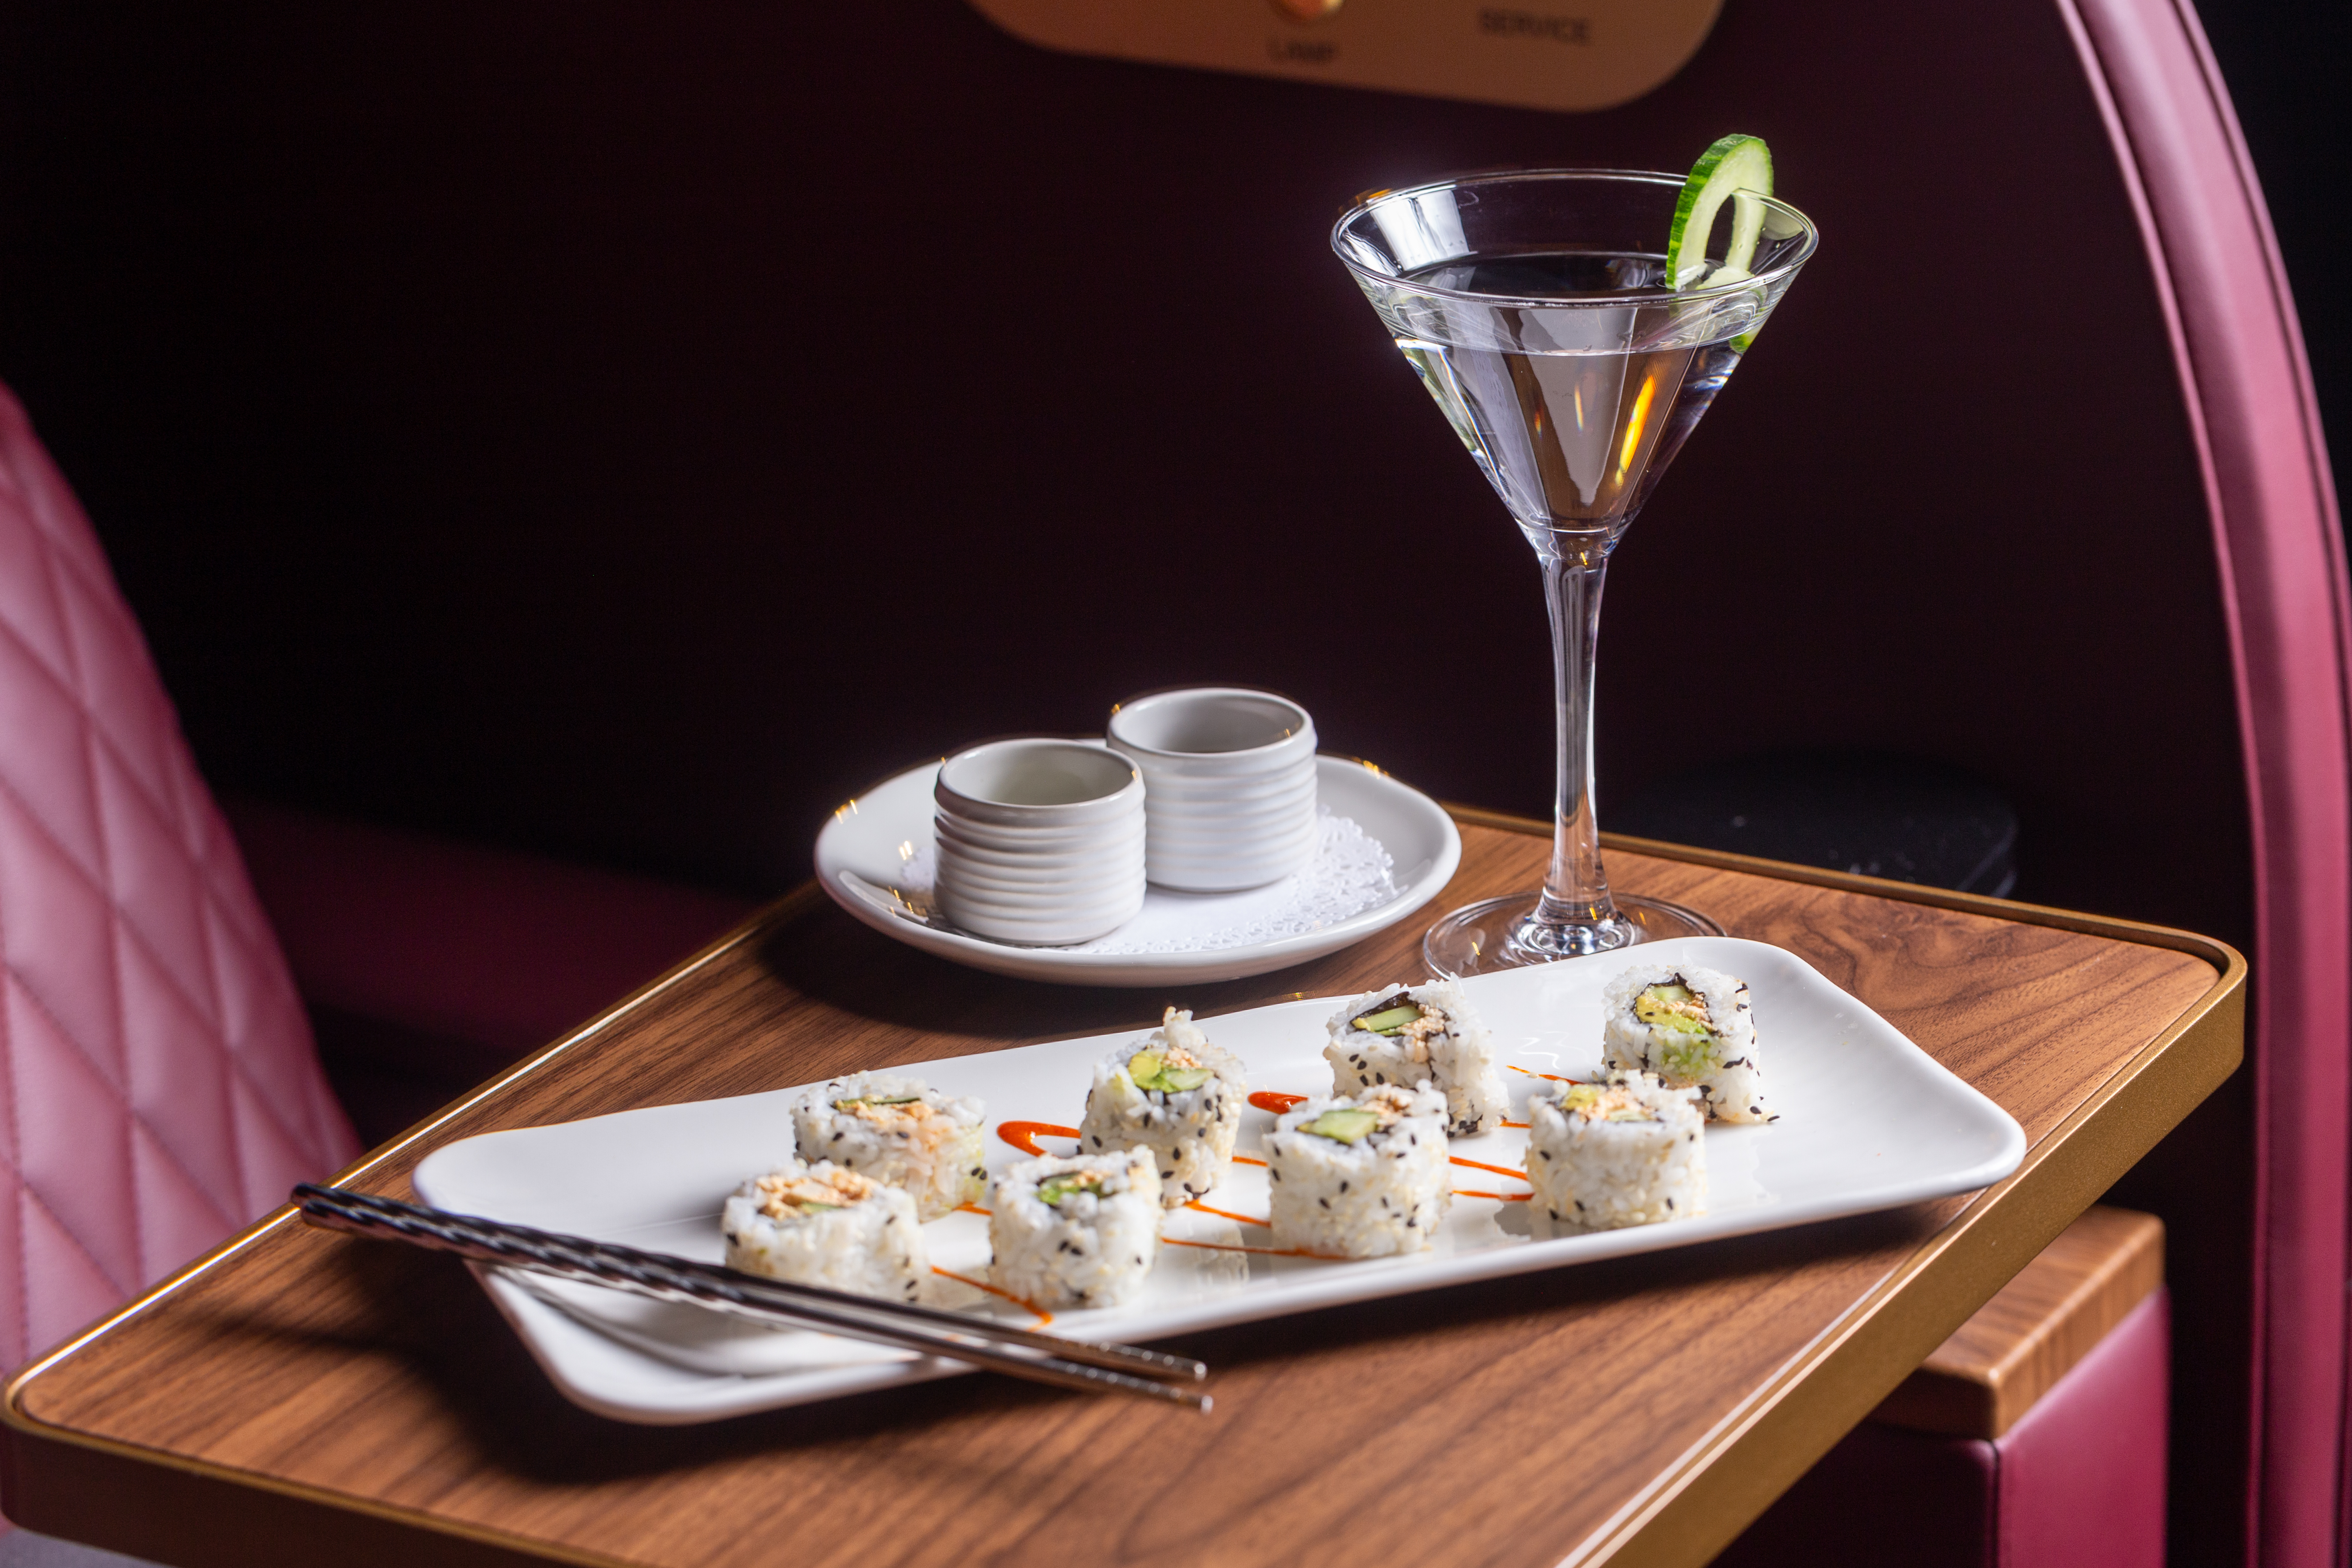 A martini and a sushi roll at a swivel table within a pod at Reel Luxury Cinemas in the Woodlands.